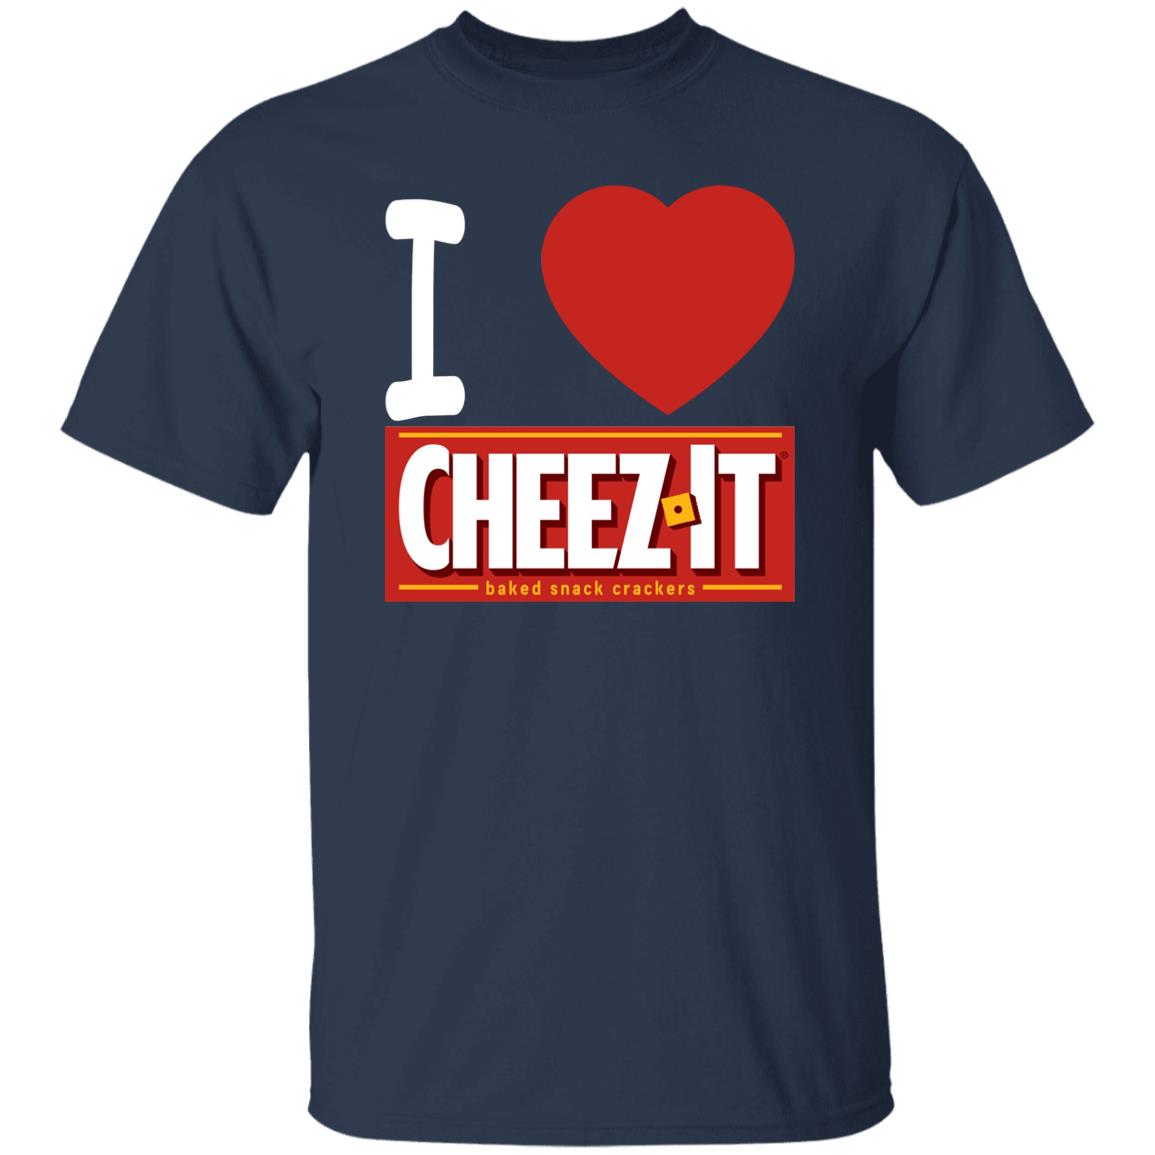 I Love Cheez-It Baked Snack Crackers Shirt | Allbluetees.com